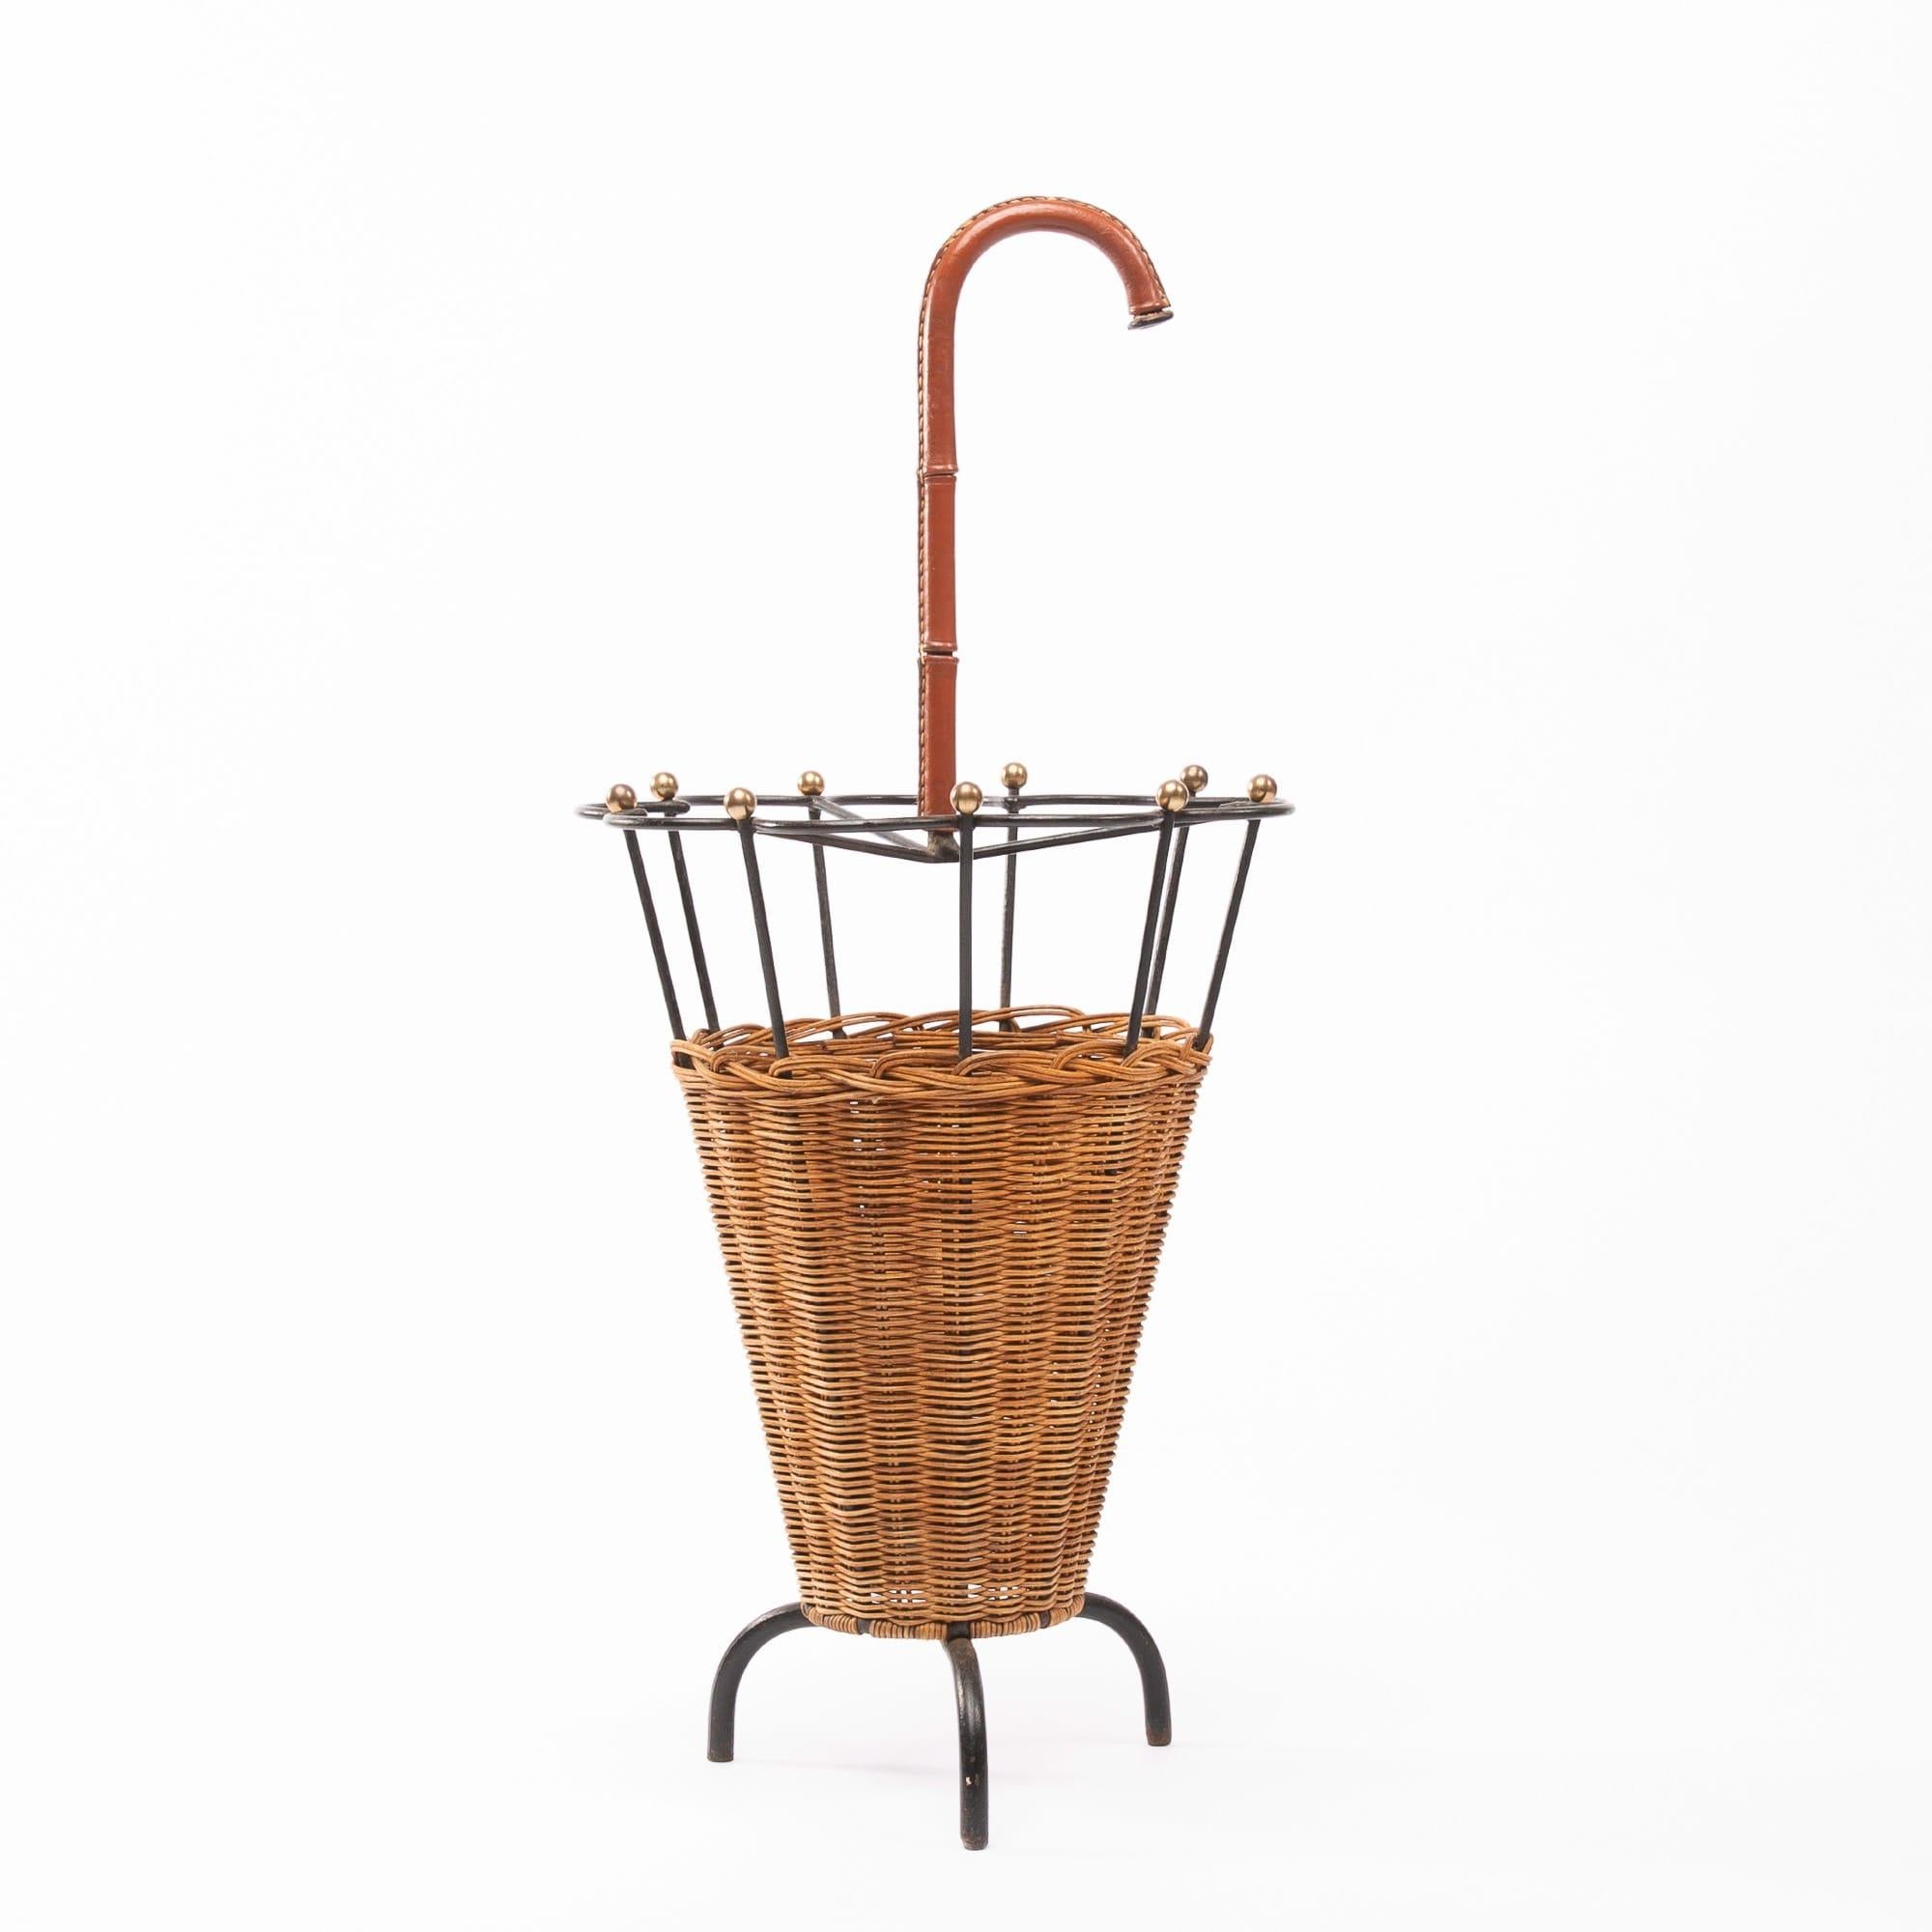 Nice, unusual umbrella stand attributed to Jacques Adnet (France).

We did not find a publication about this item from an address where we bought pieces from Jacques Adnet.

The object consists of a steel frame sheathed with rattan, the handle